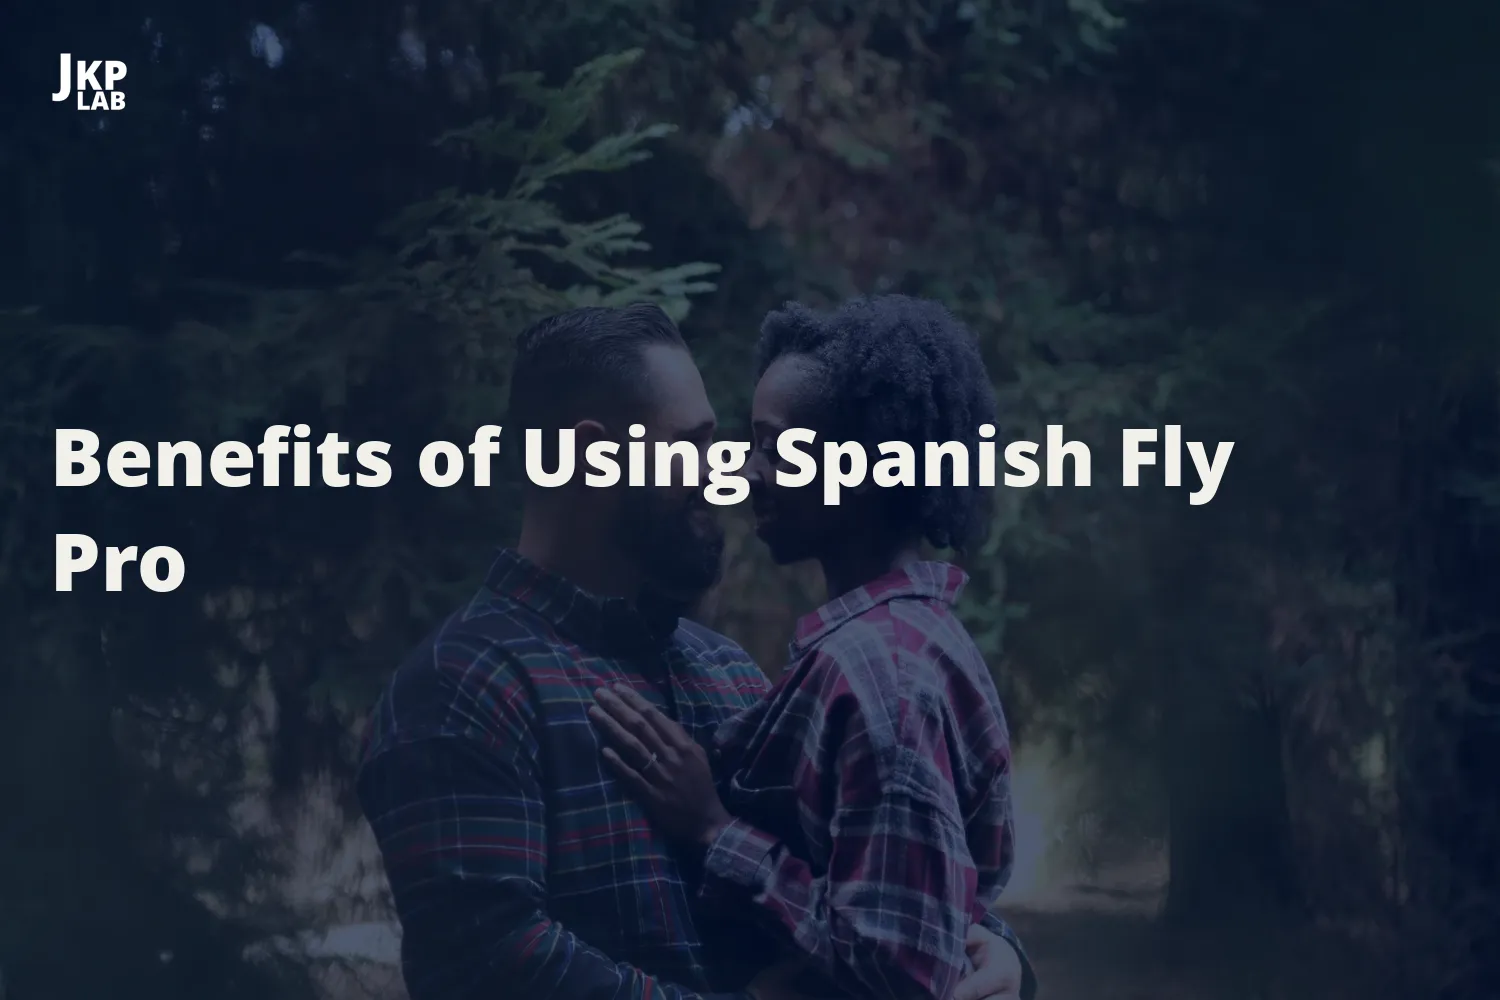 Addressing Common Concerns about Spanish Fly